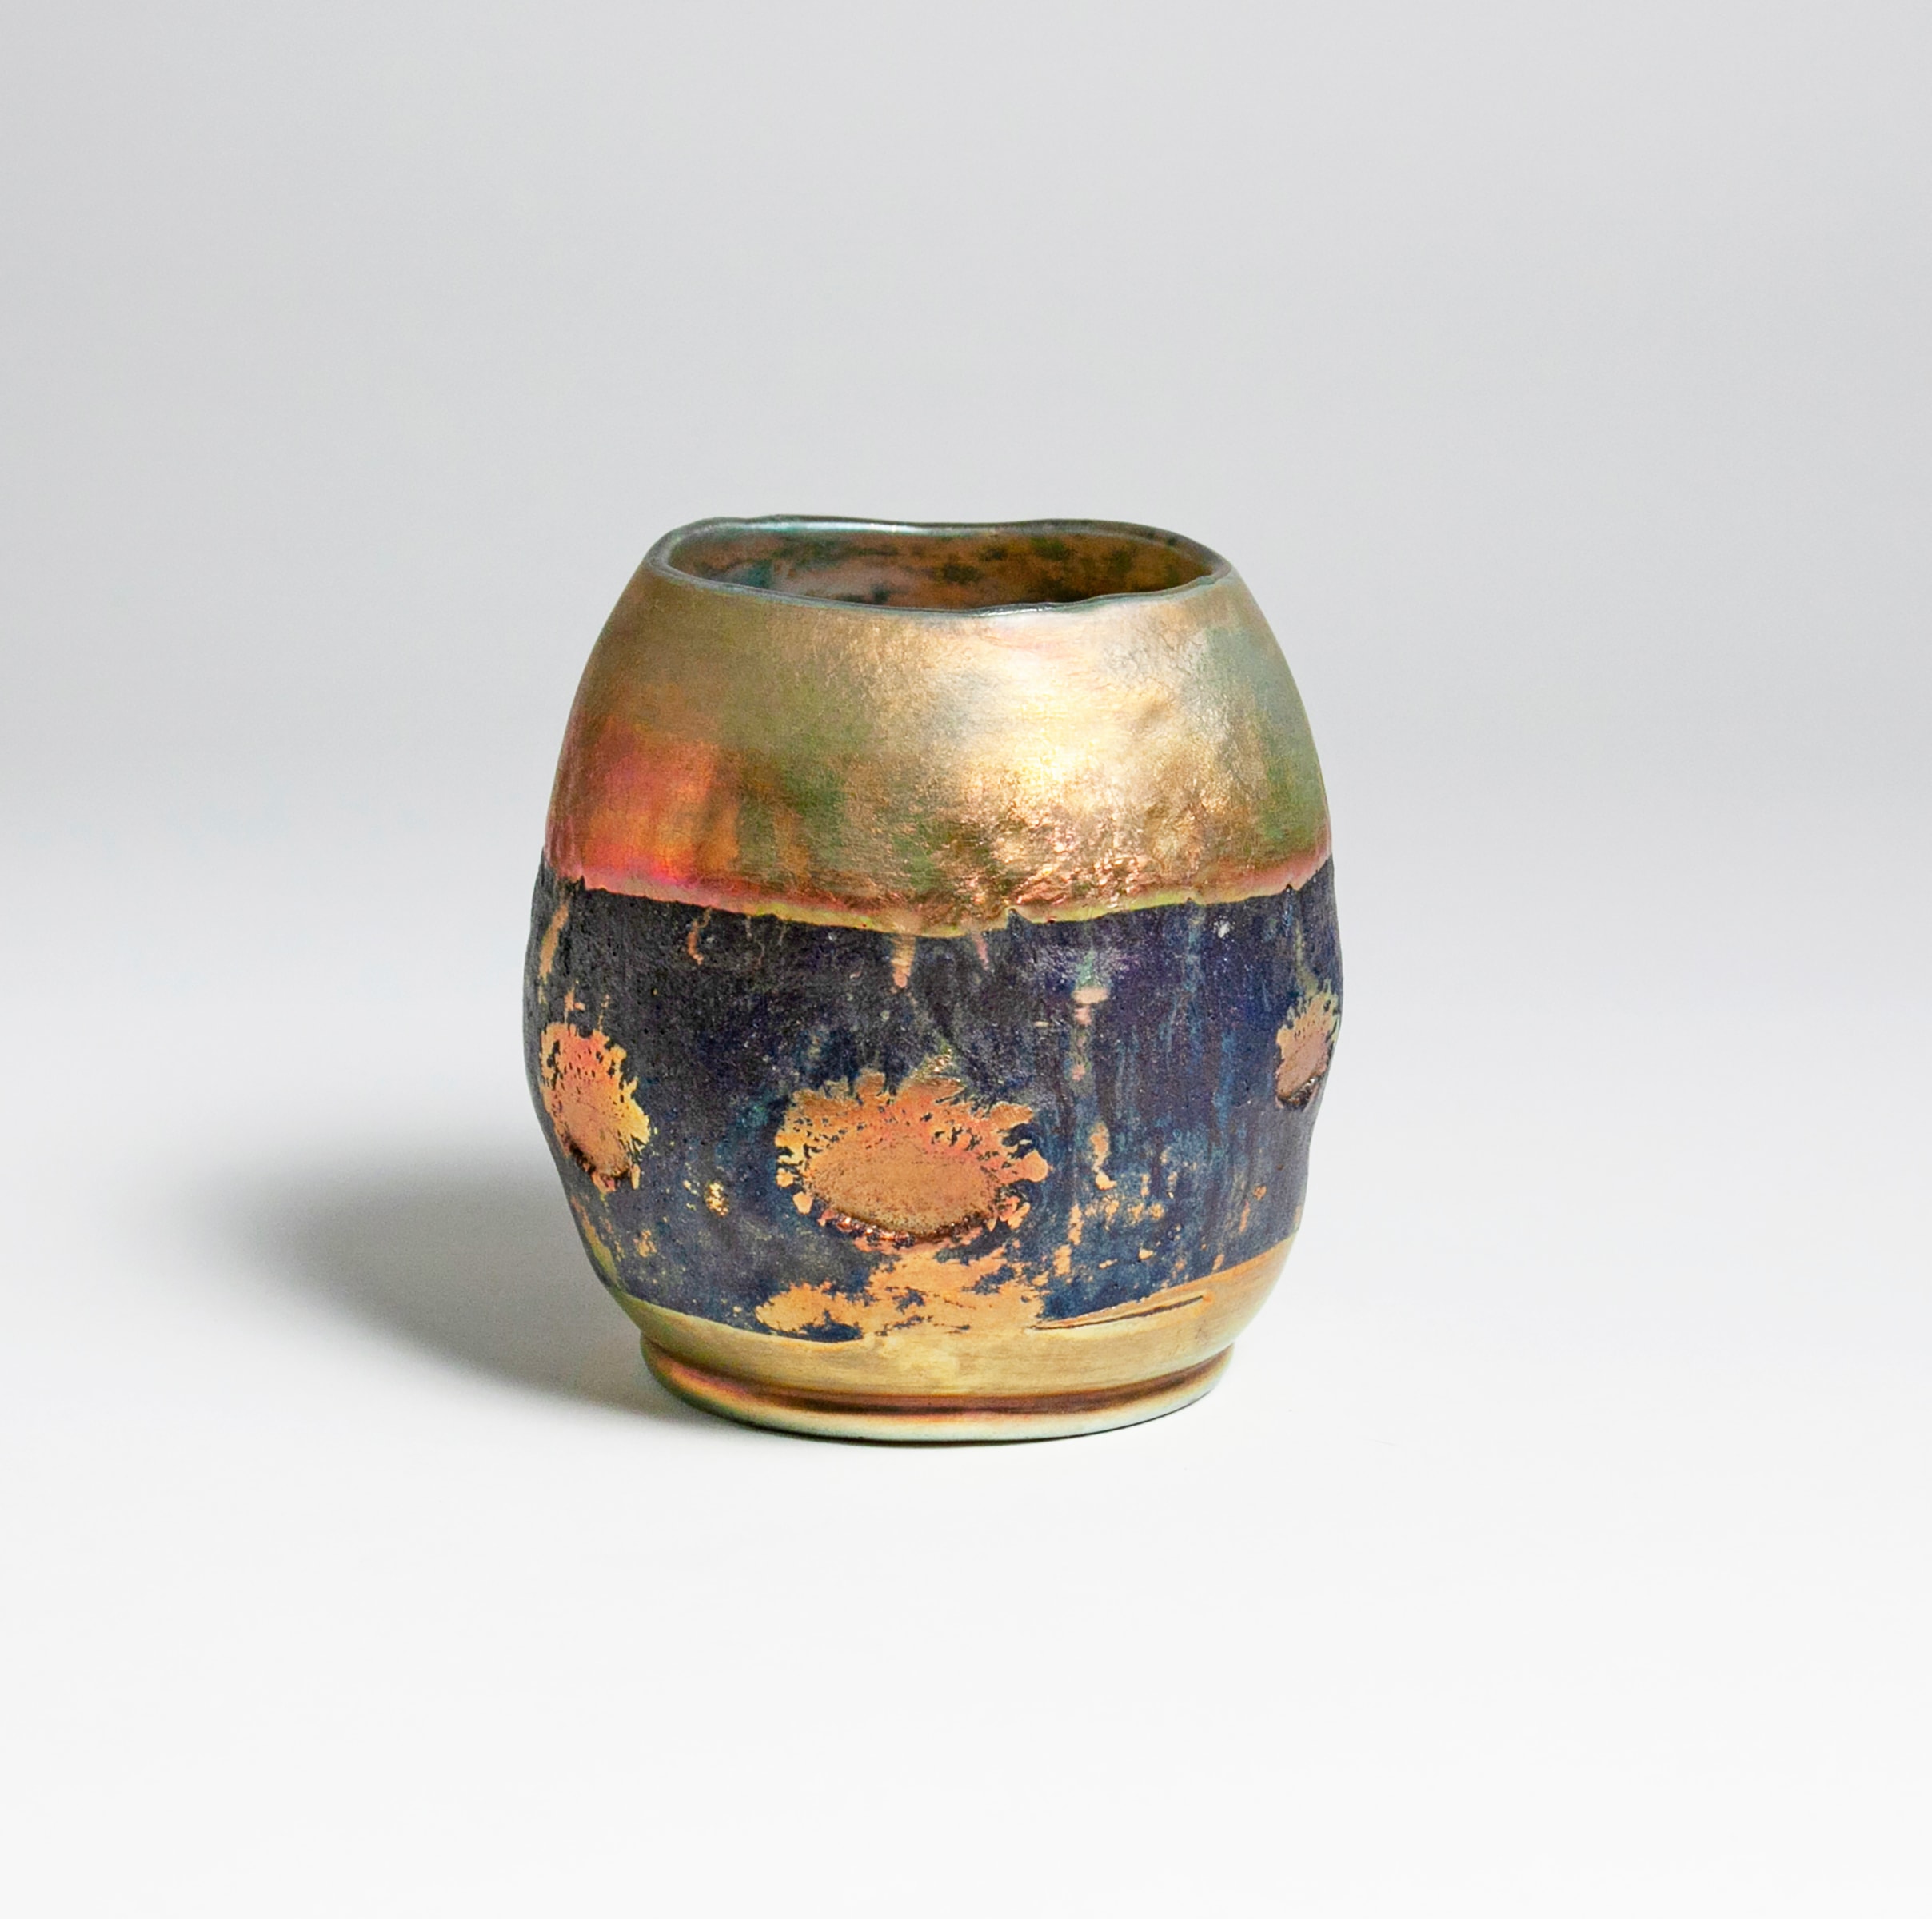 a rare tiffany studios lava favrile glass vase, short irregular cylindrical form recalls japanese raku tea bowls. The body of the vase in gold iridescent glass, a horizontal band of rough textured black matte glass at the center featuring a row of splattered dots of glass in the same gold iridescent.